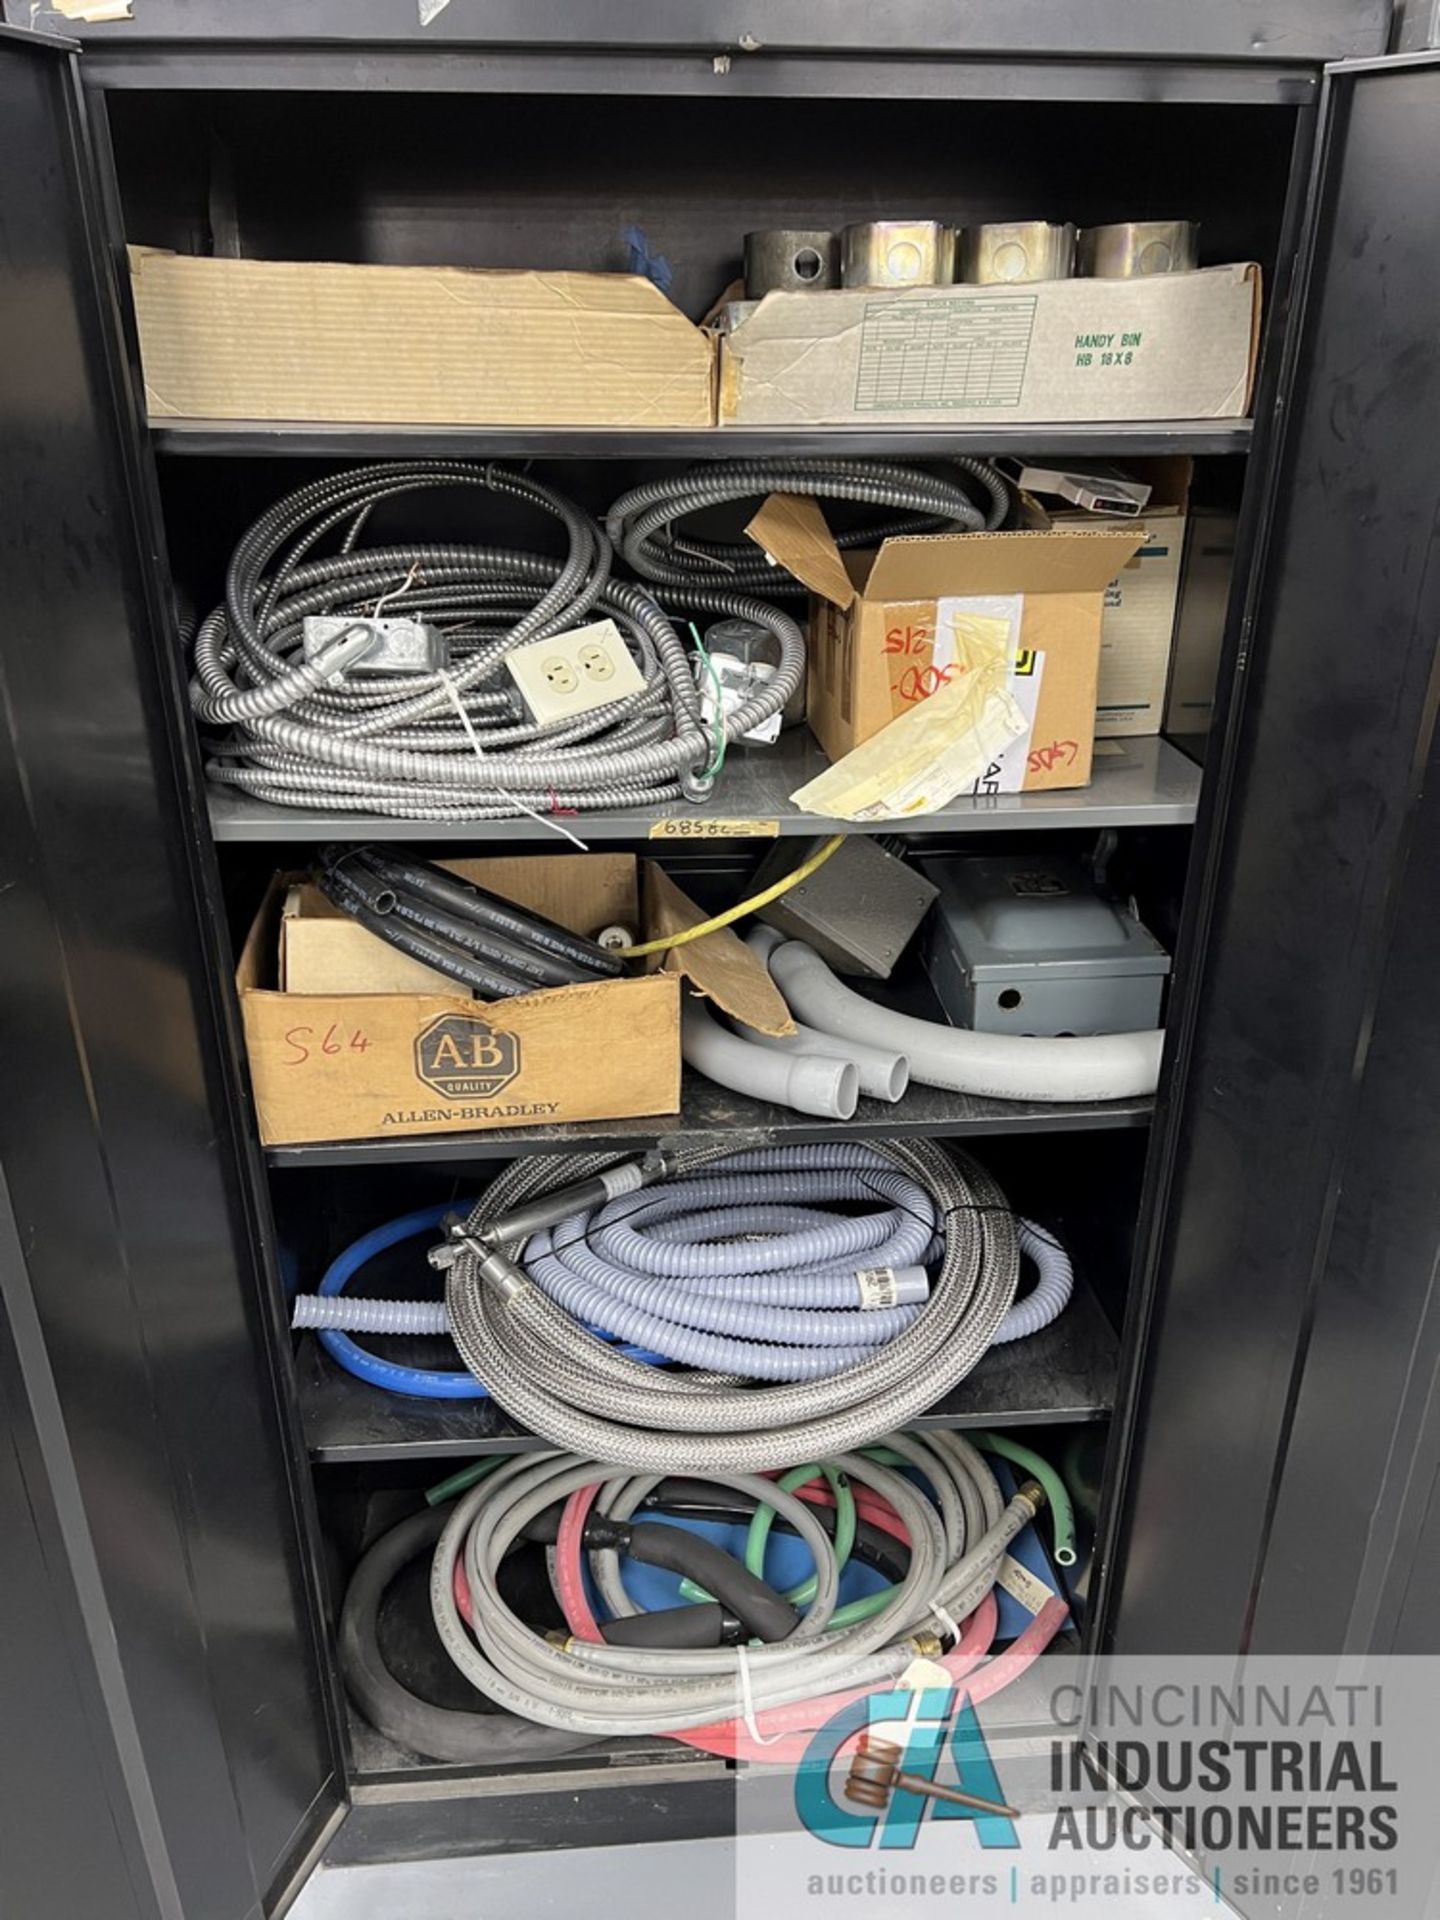 2-DOOR CABINETS WITH MISCELLANEOUS TOOLING, ELECTRICAL, MAINTENANCE, MACHINE PARTS, HARDWARE, - Image 10 of 15